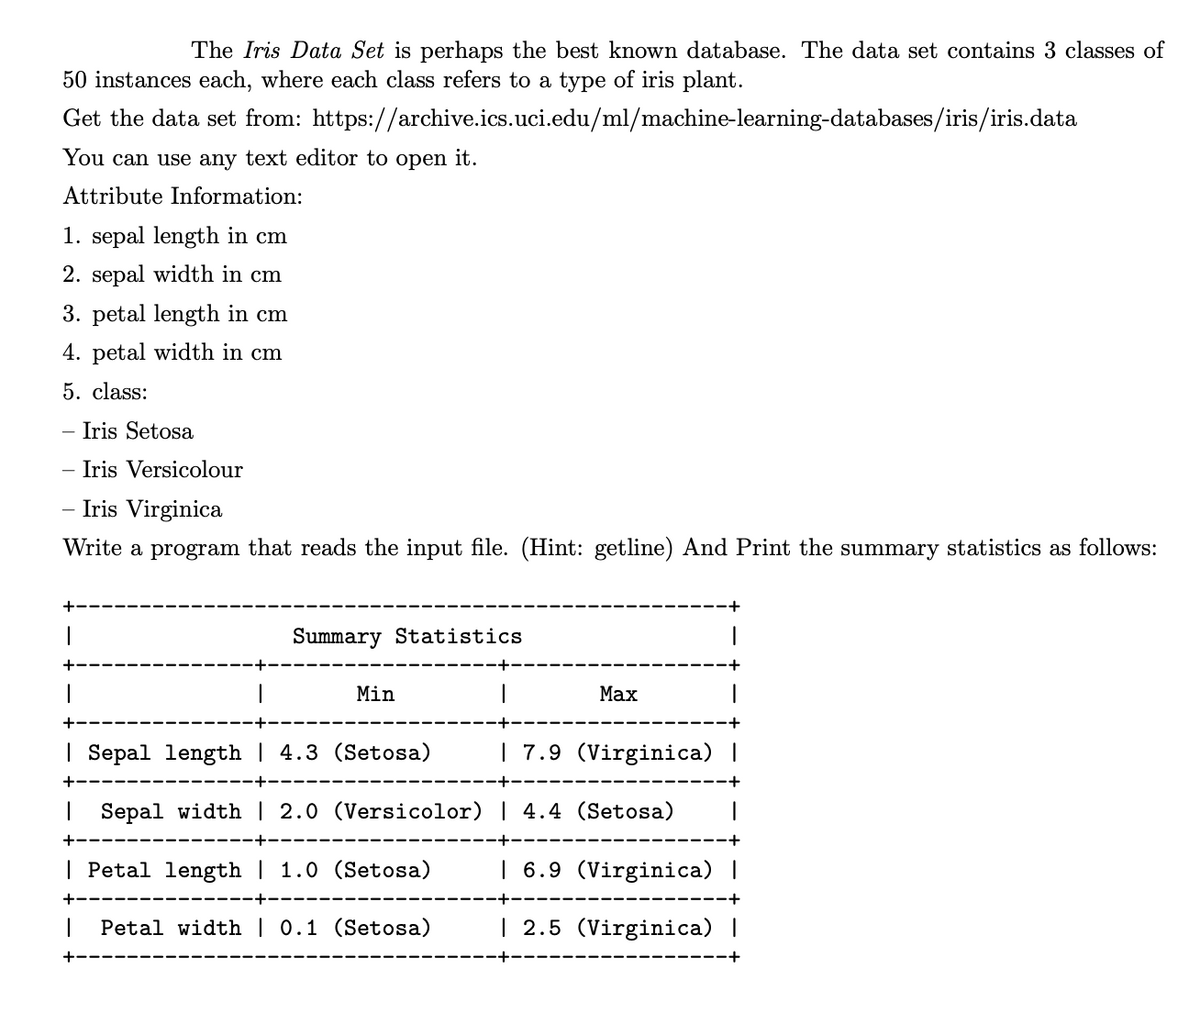 The Iris Data Set is perhaps the best known database. The data set contains 3 classes of
50 instances each, where each class refers to a type of iris plant.
Get the data set from: https://archive.ics.uci.edu/ml/machine-learning-databases/iris/iris.data
You can use any text editor to open it.
Attribute Information:
1. sepal length in cm
2. sepal width in cm
3. petal length in cm
4. petal width in cm
5. class:
-Iris Setosa
-Iris Versicolour
Iris Virginica
Write a program that reads the input file. (Hint: getline) And Print the summary statistics as follows:
Summary Statistics
Min
Маx
| Sepal length | 4.3 (Setosa)
| 7.9 (Virginica) |
| Sepal width | 2.0 (Versicolor)
4.4 (Setosa)
| Petal length | 1.0 (Setosa)
| 6.9 (Virginica) |
Petal width | 0.1 (Setosa)
| 2.5 (Virginica) |
